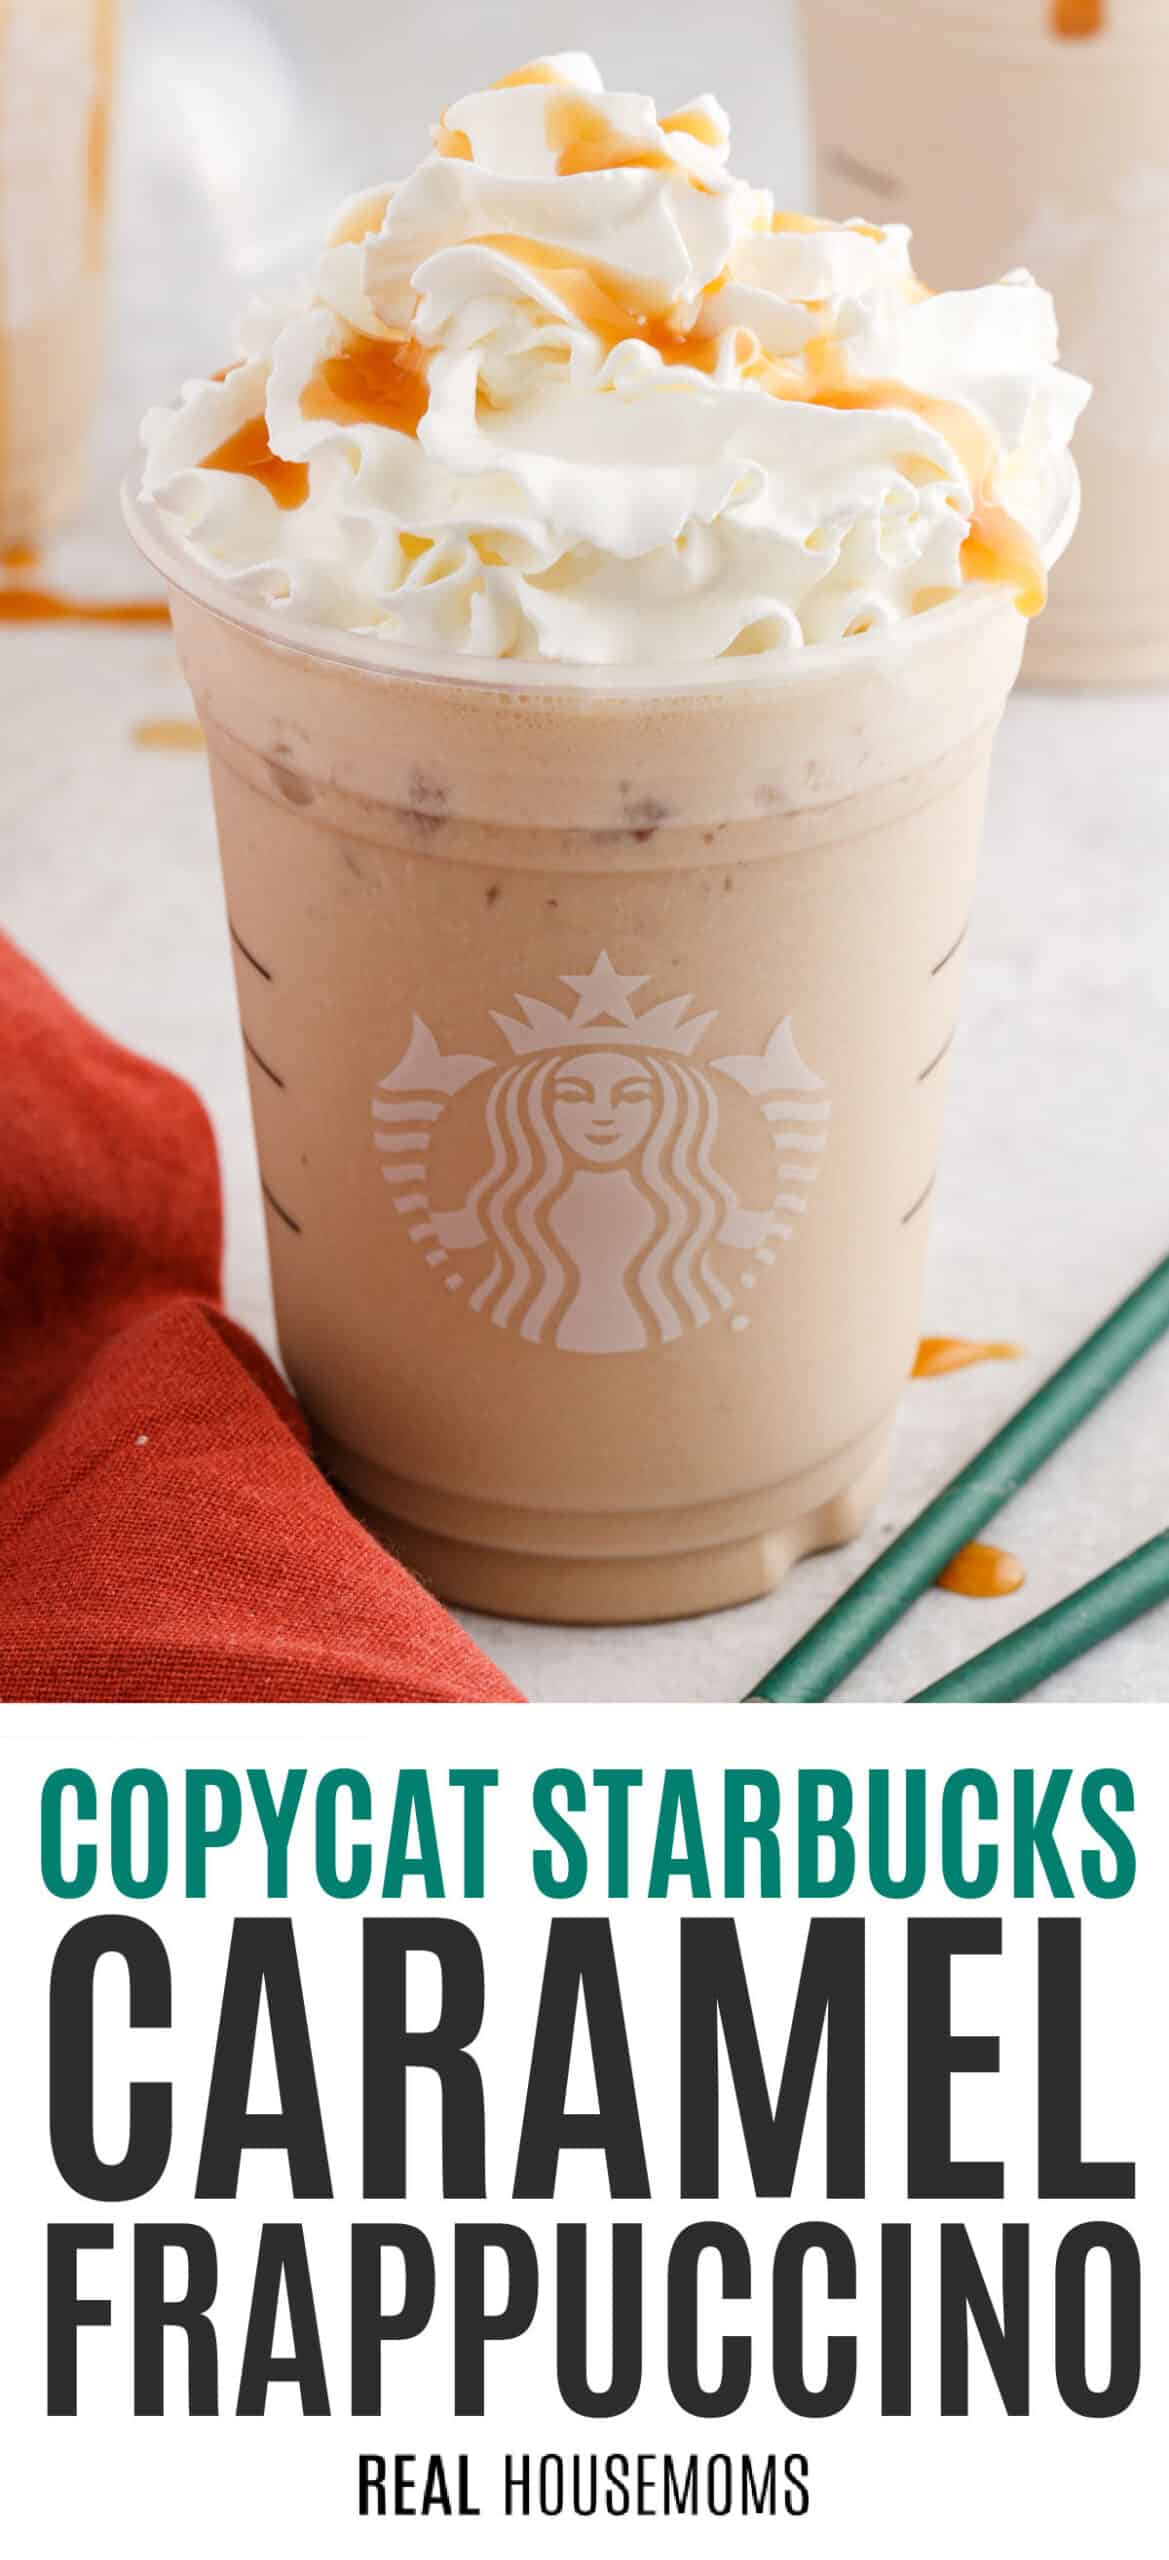 How to Draw a Starbucks Frappuccino Cute